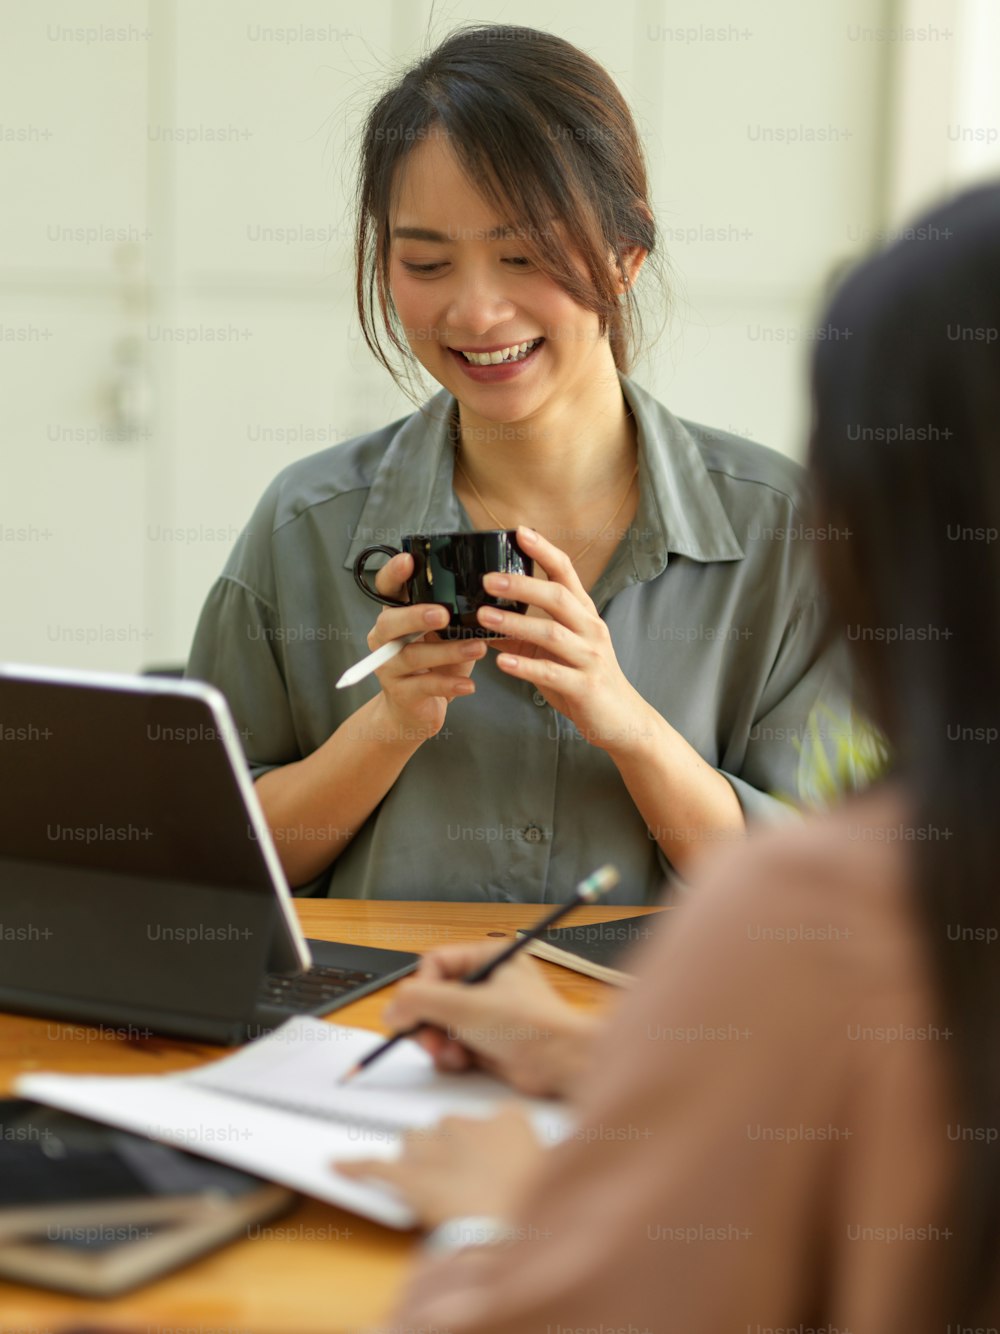 Cropped shot of smiling female holding cup while sitting opposite her coworker in office room